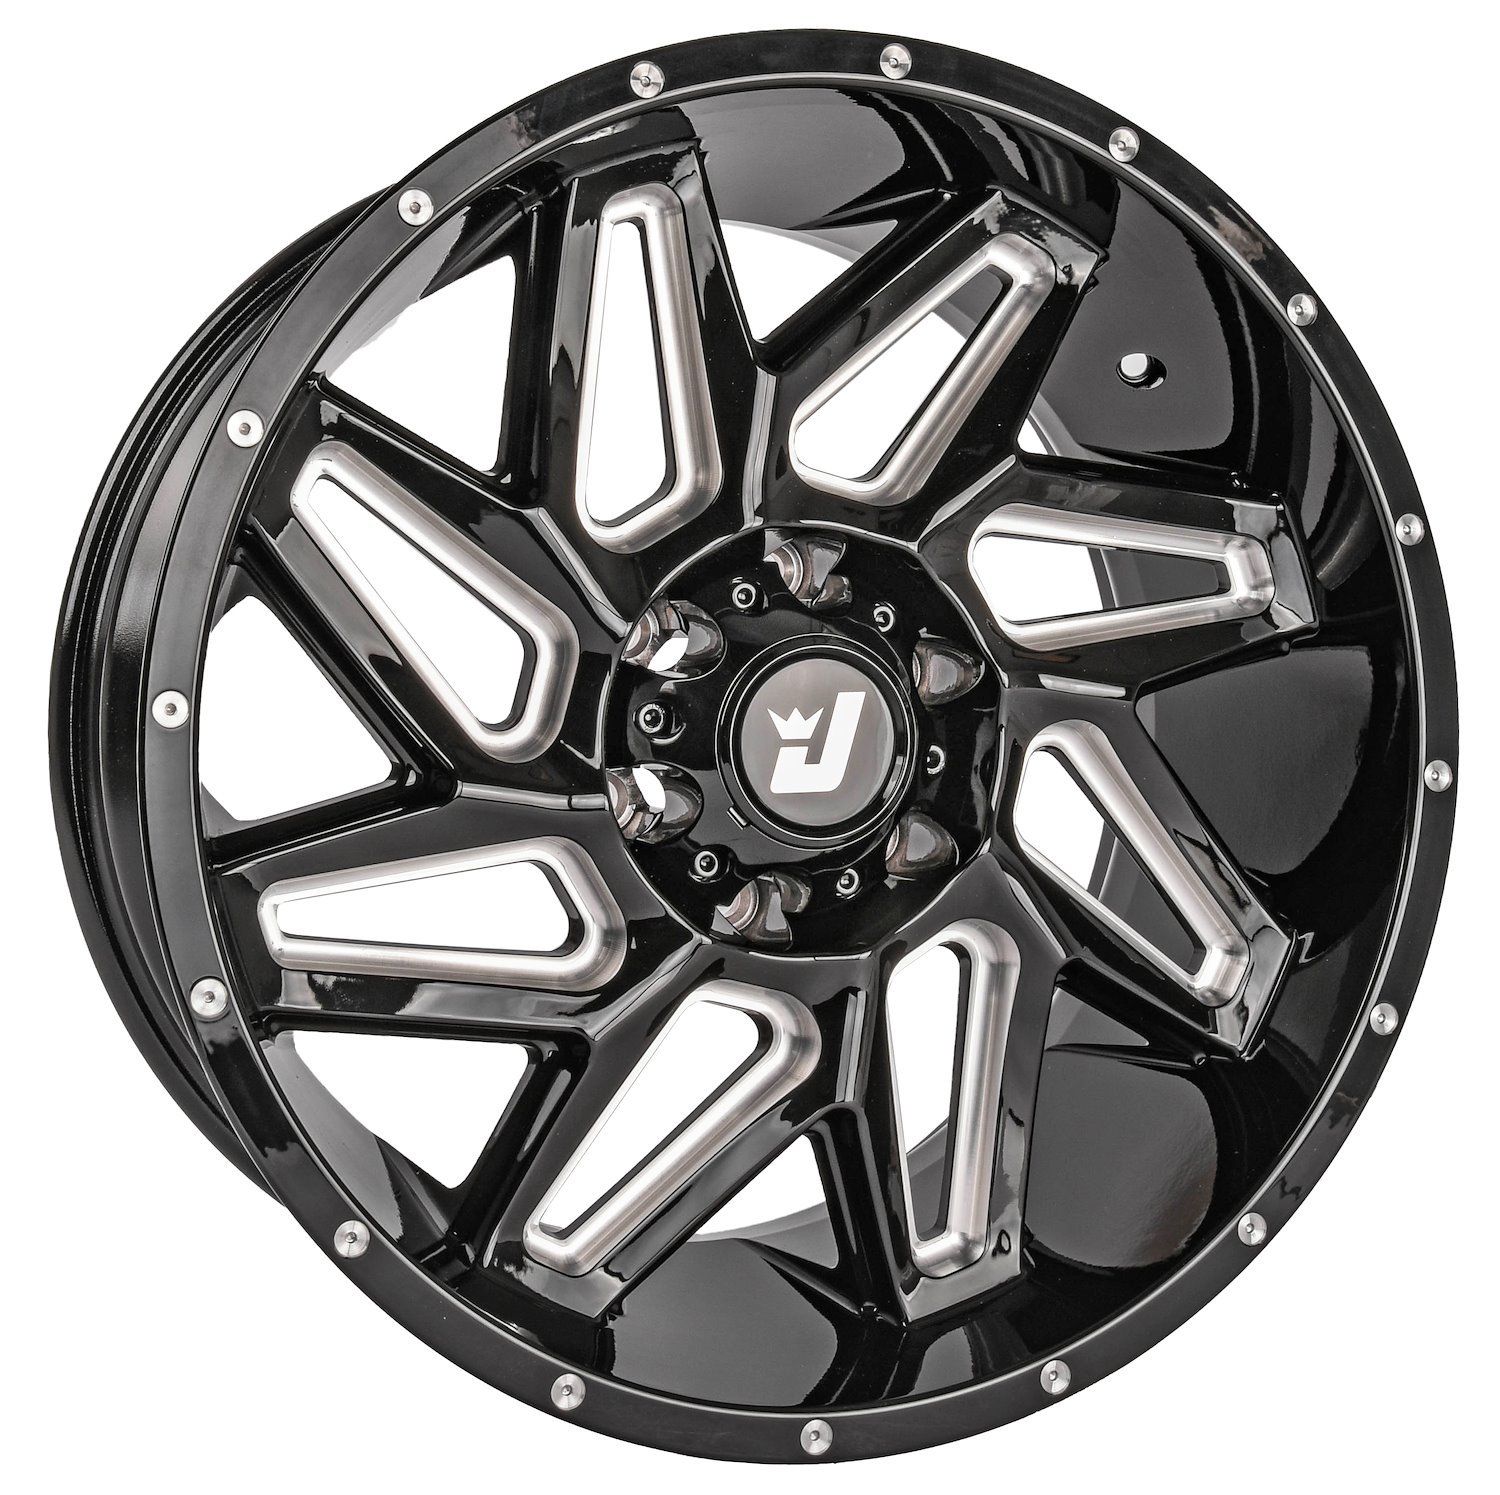 Catalyst Wheel [Size: 20" x 10"] Gloss Black with Milled Spokes